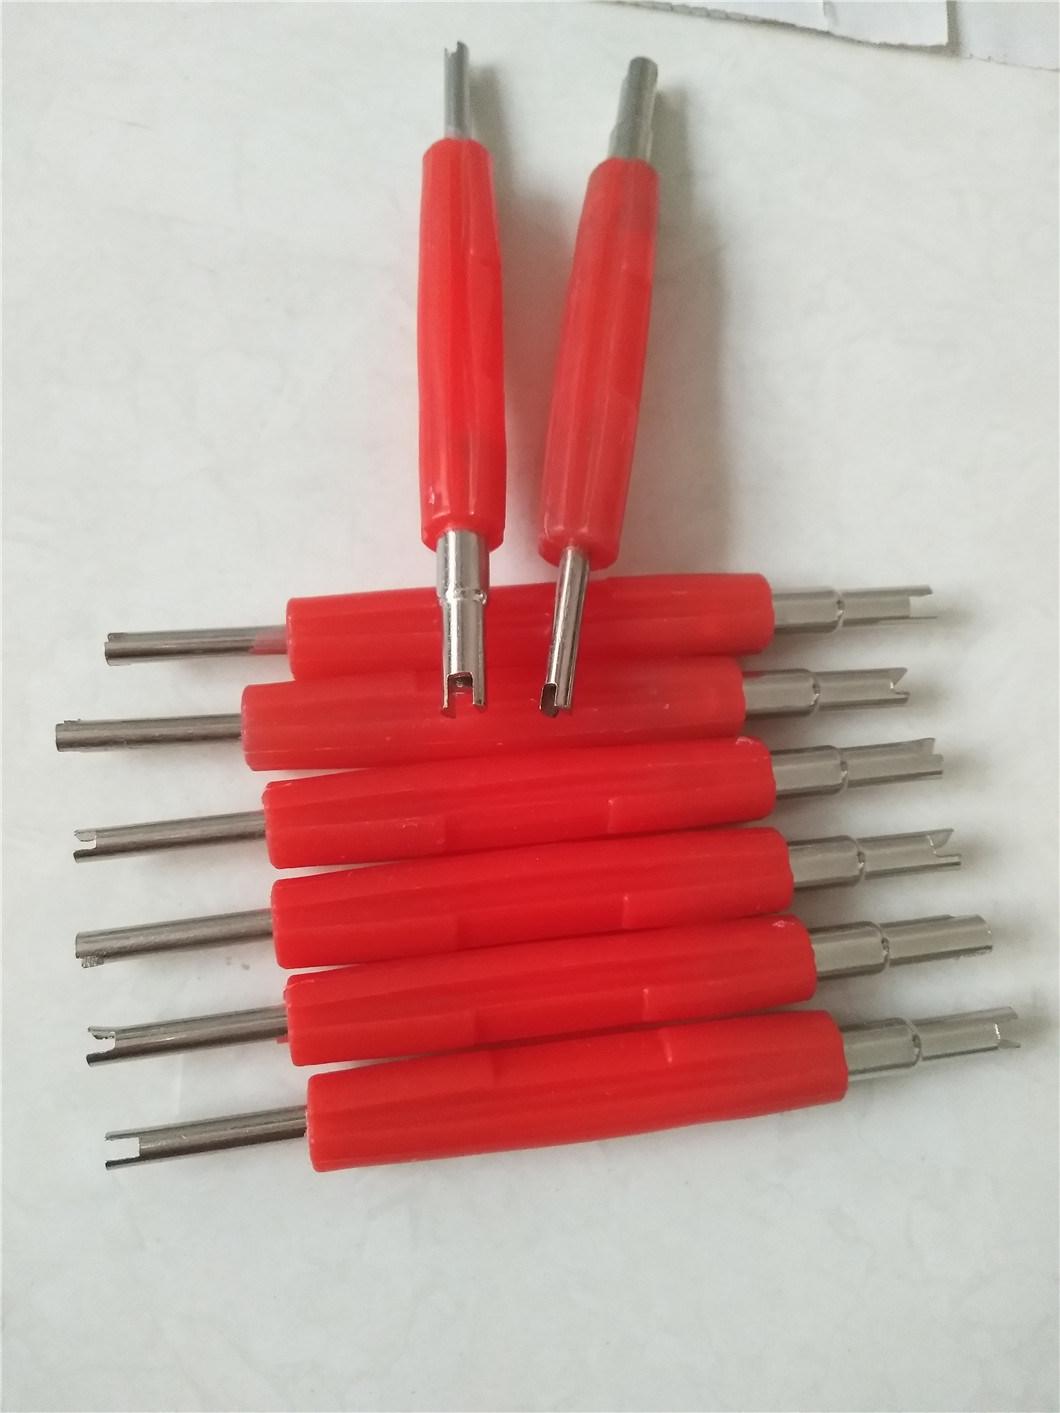 Slotted Handle Car Auto Valve Core Removal Tool Screwdriver